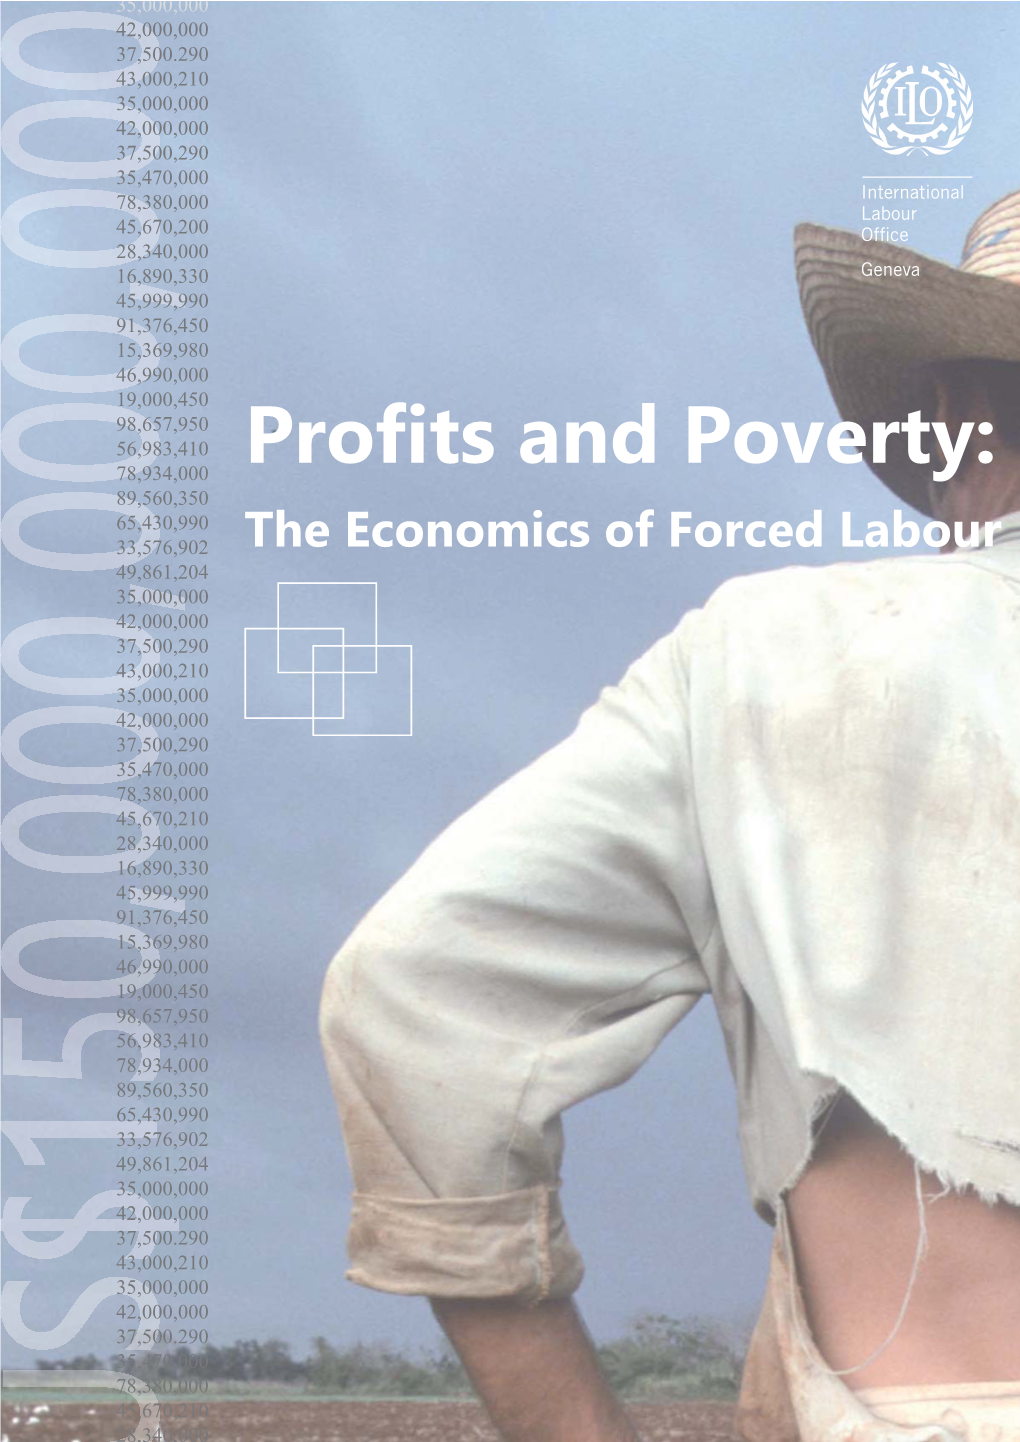 PROFITS and POVERTY: the Economics of Forced Labour